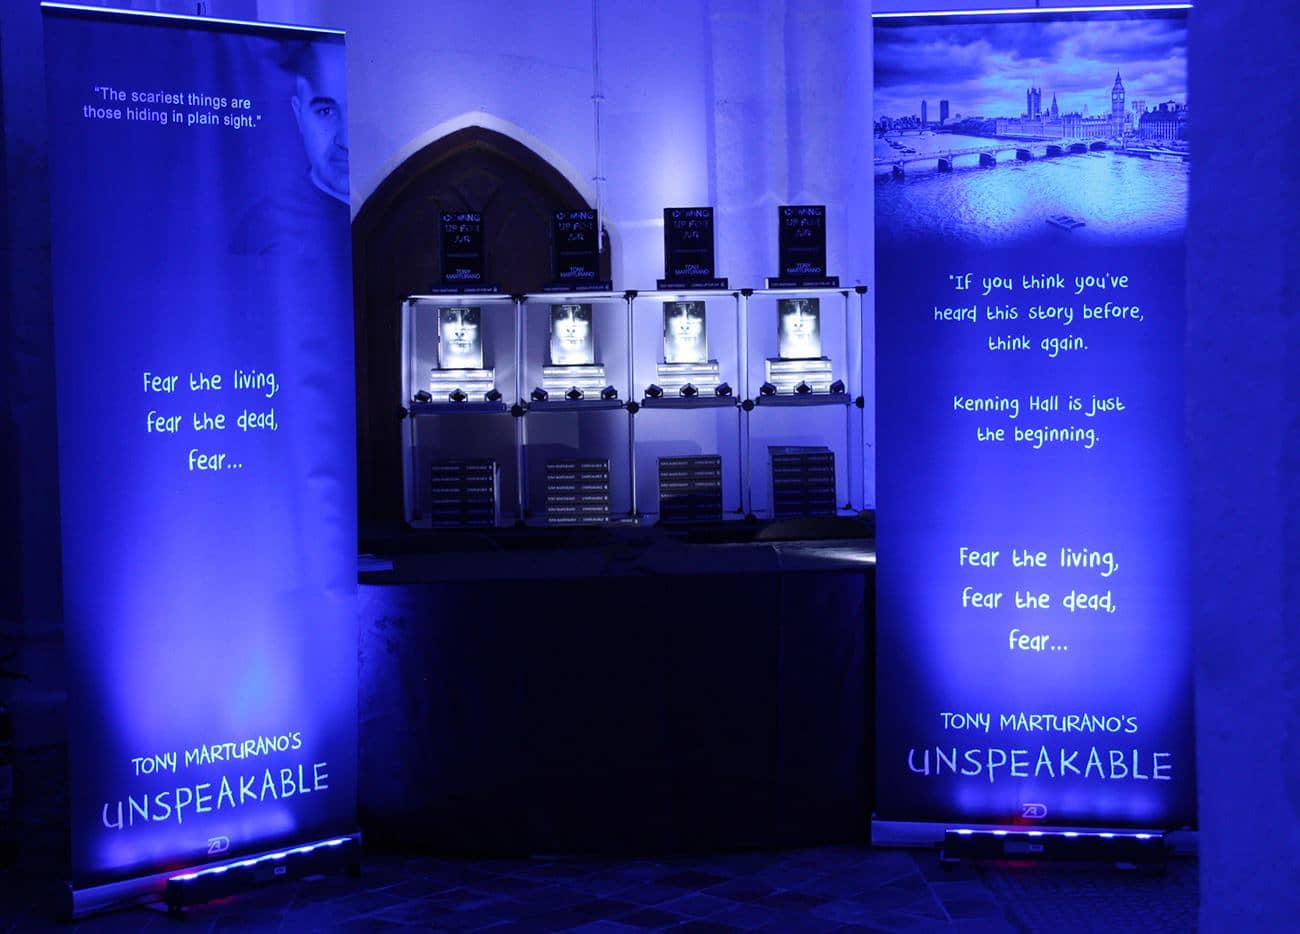 Unspeakable by Tony Marturano, book launch